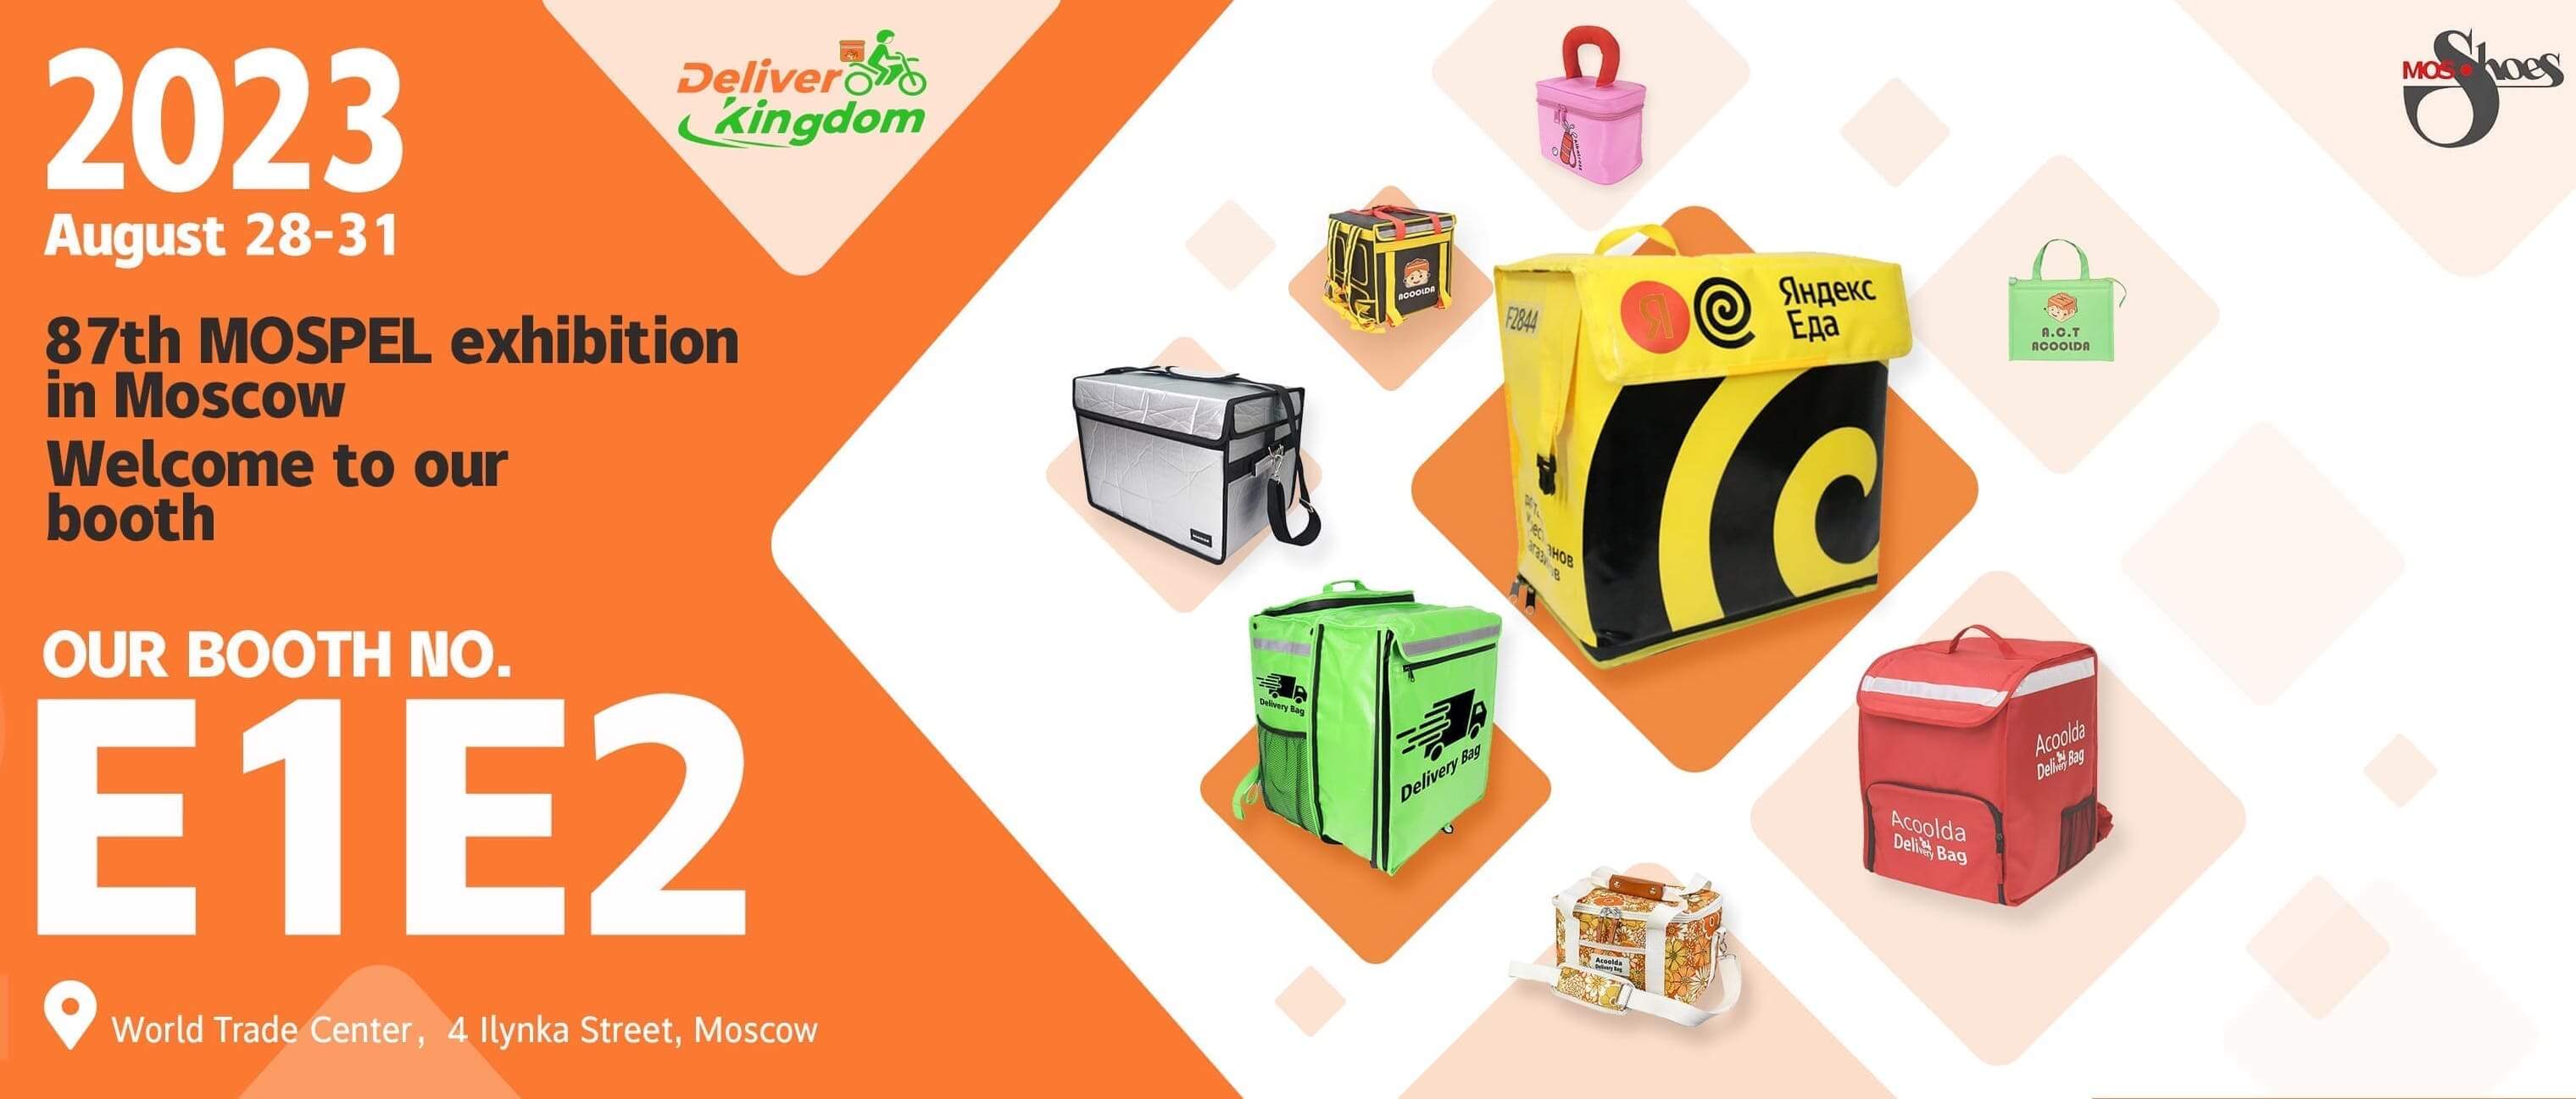 DeliverKingdom Showcasing Innovative Insulated Bags and Rider's Gears at 87th MosShoes International Exhibition in Russia